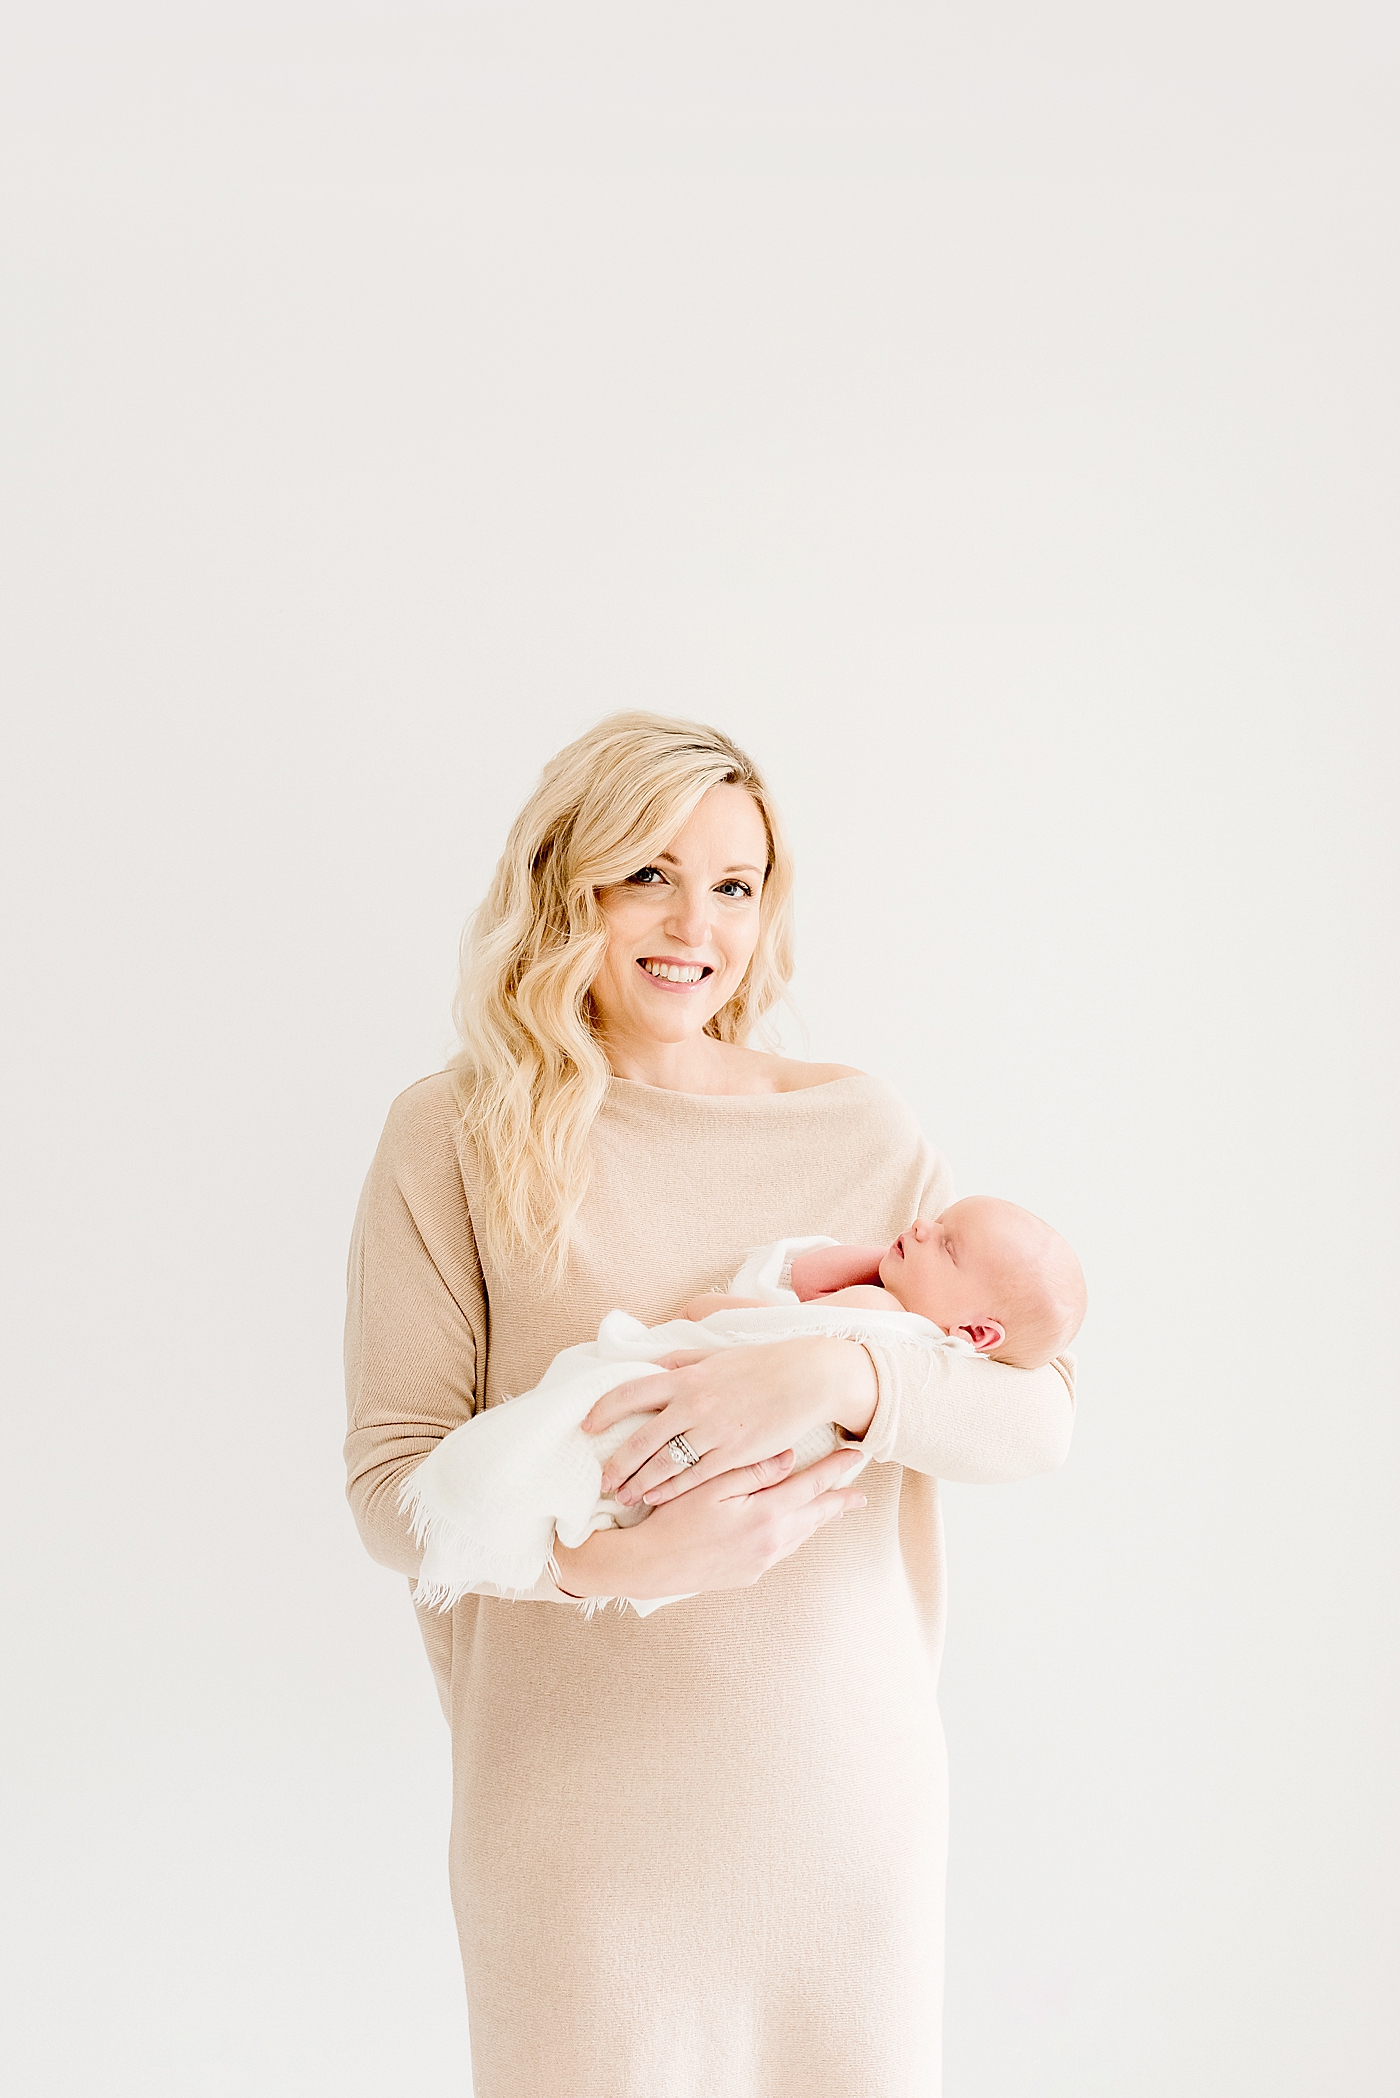 Mom holding newborn baby wrapped in white swaddle | Photo by Anna Wisjo Photography